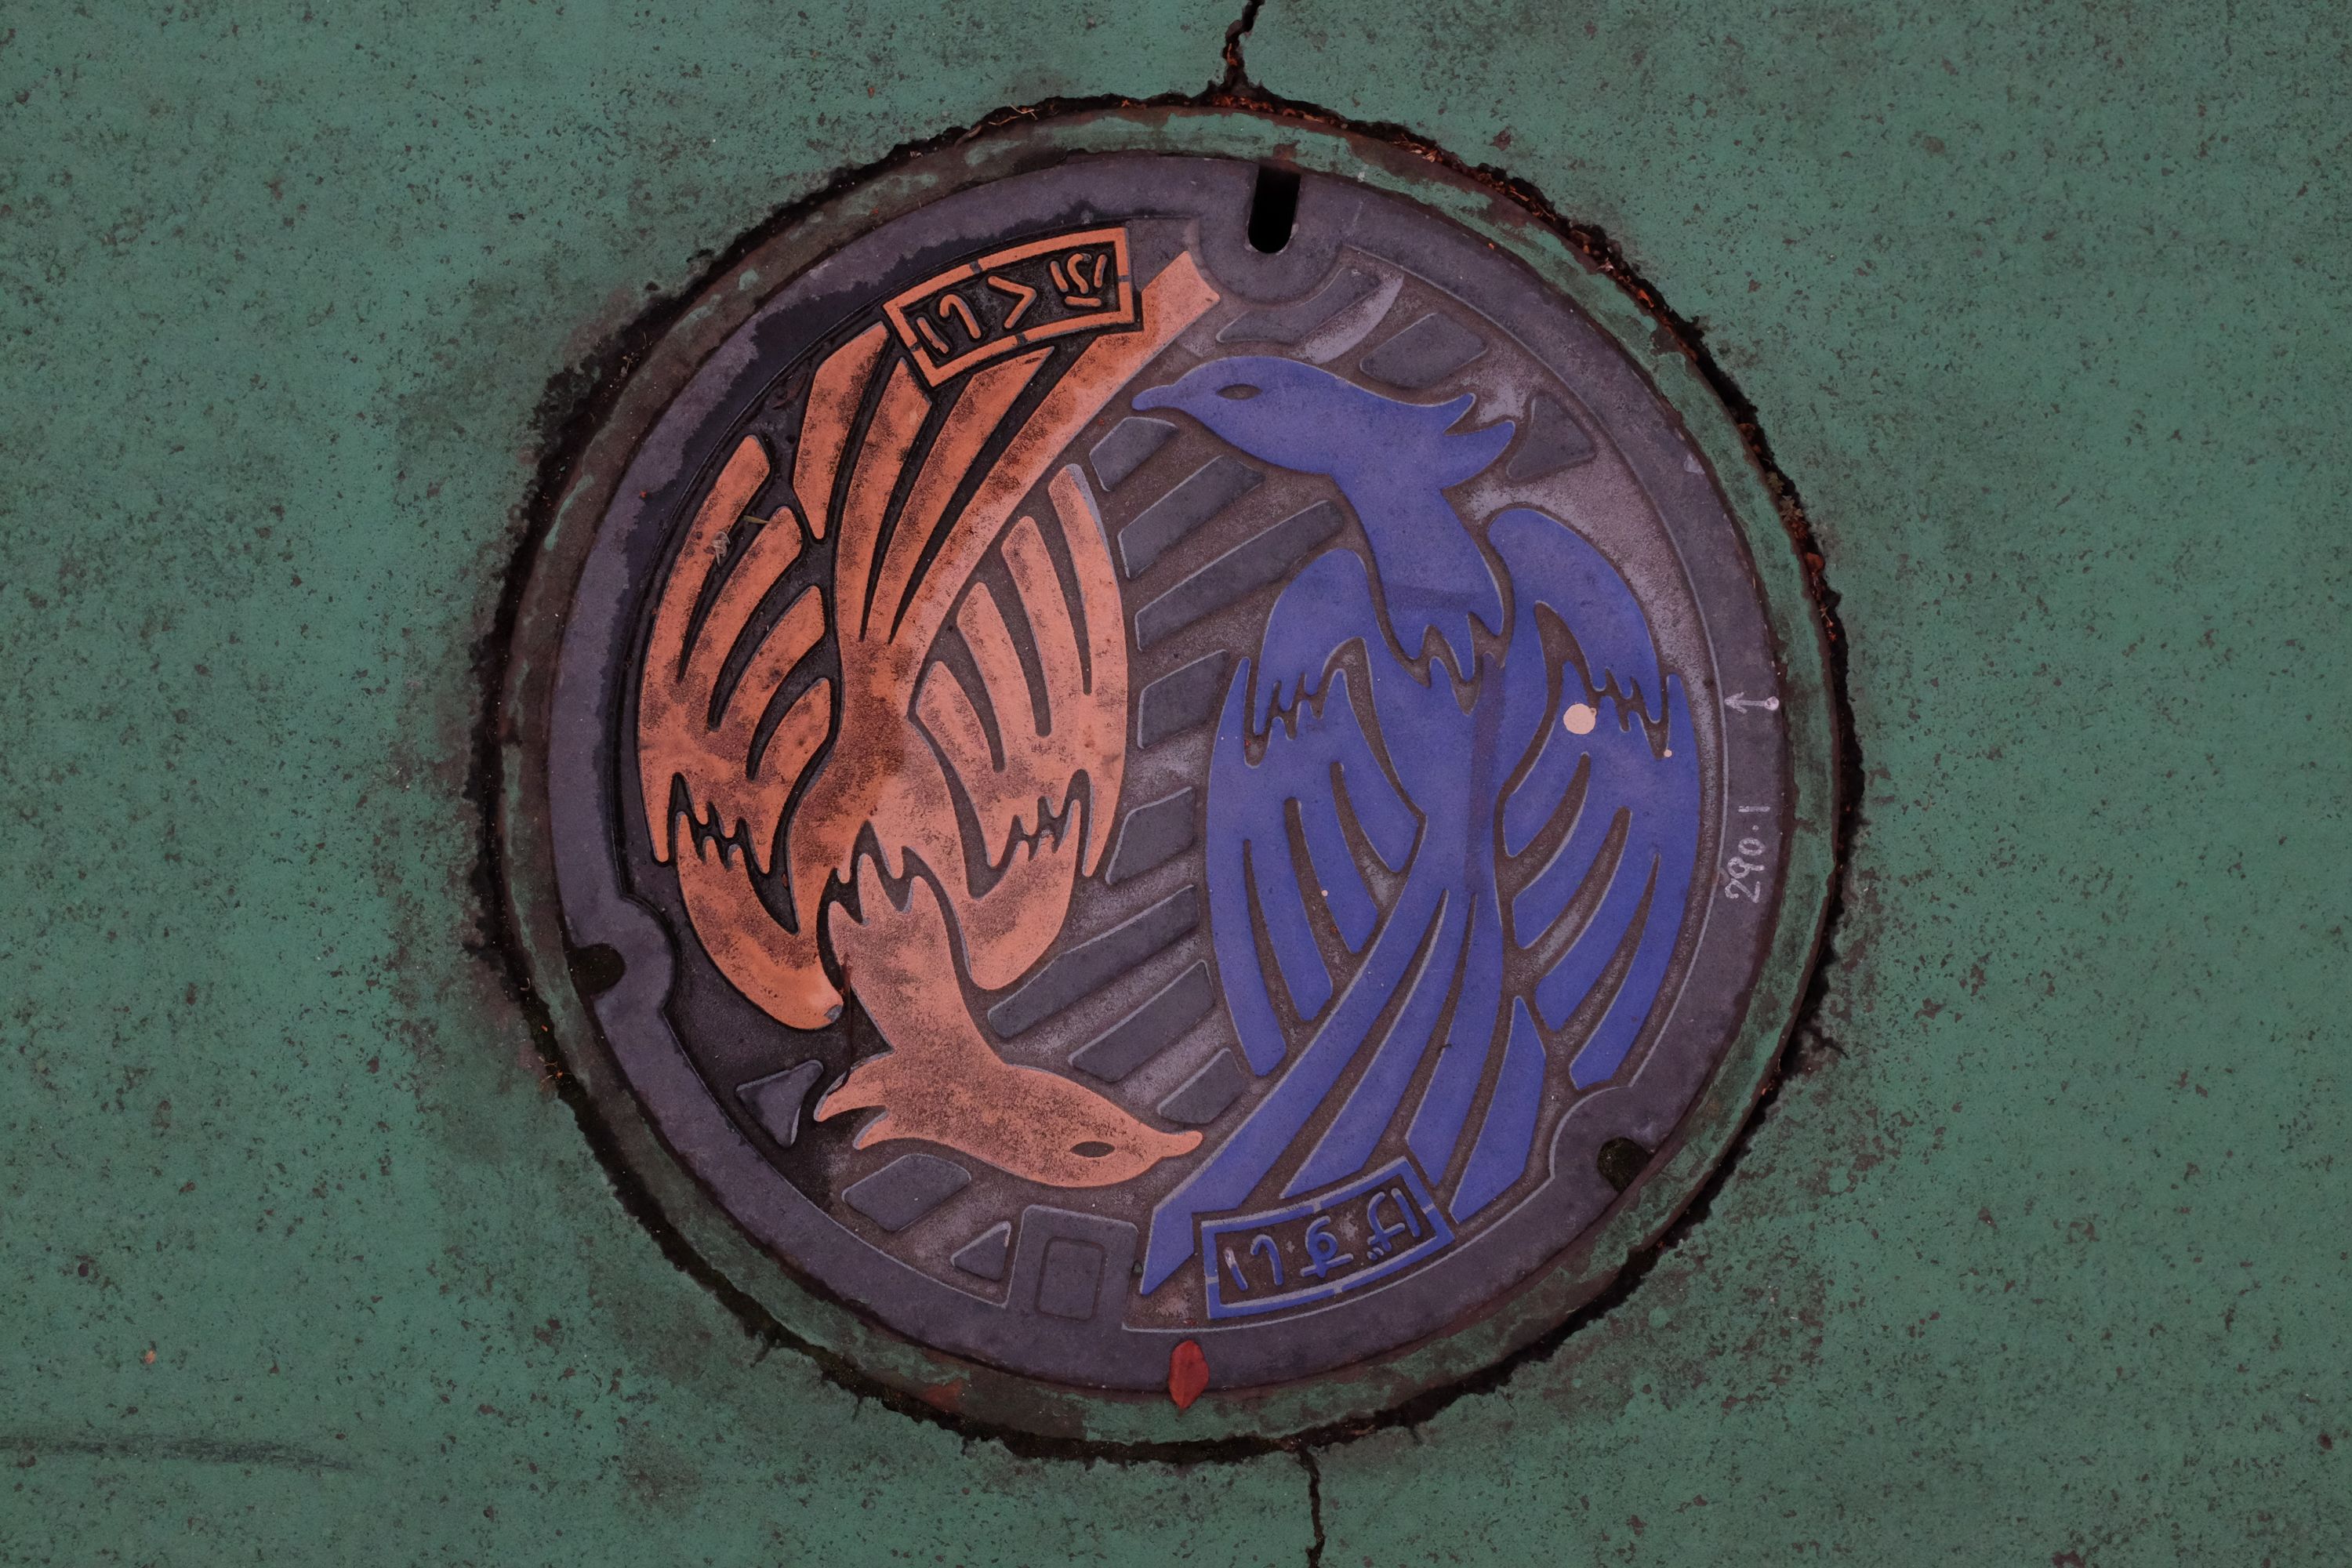 A manhole cover with two dragon-like birds, one yellow, one blue.